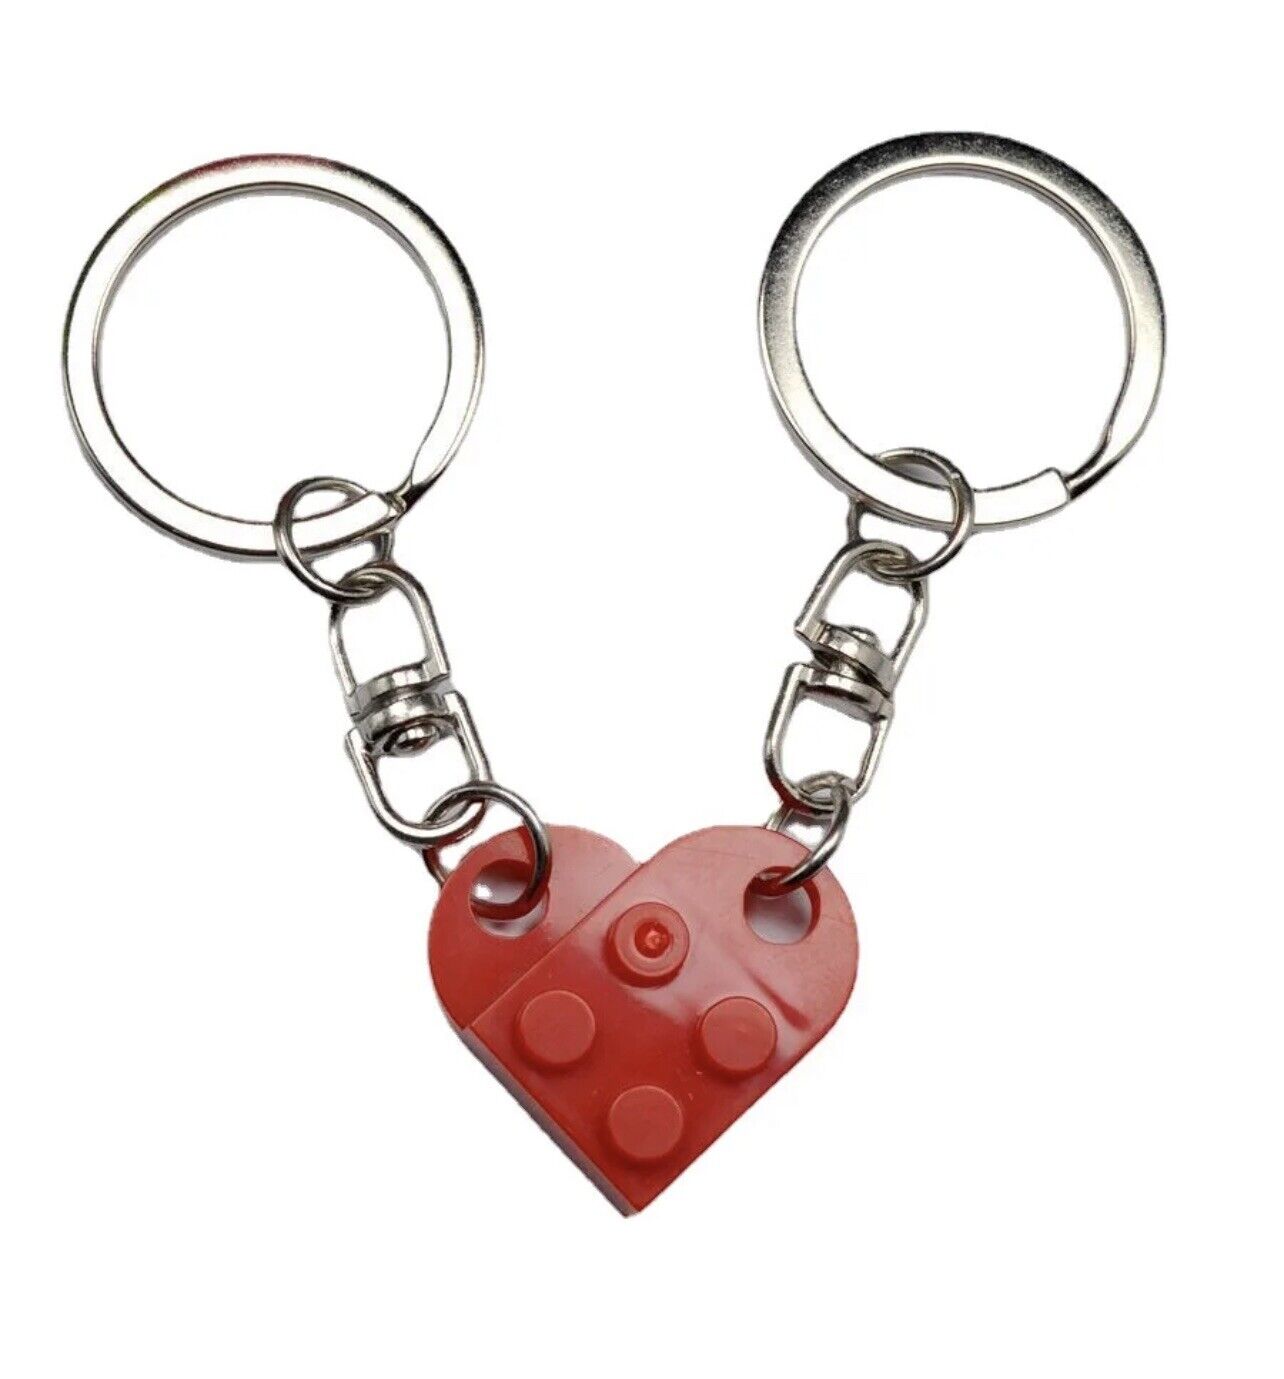 NEW RED Lego Heart Keychain FAST SHIPPING  *USA Based